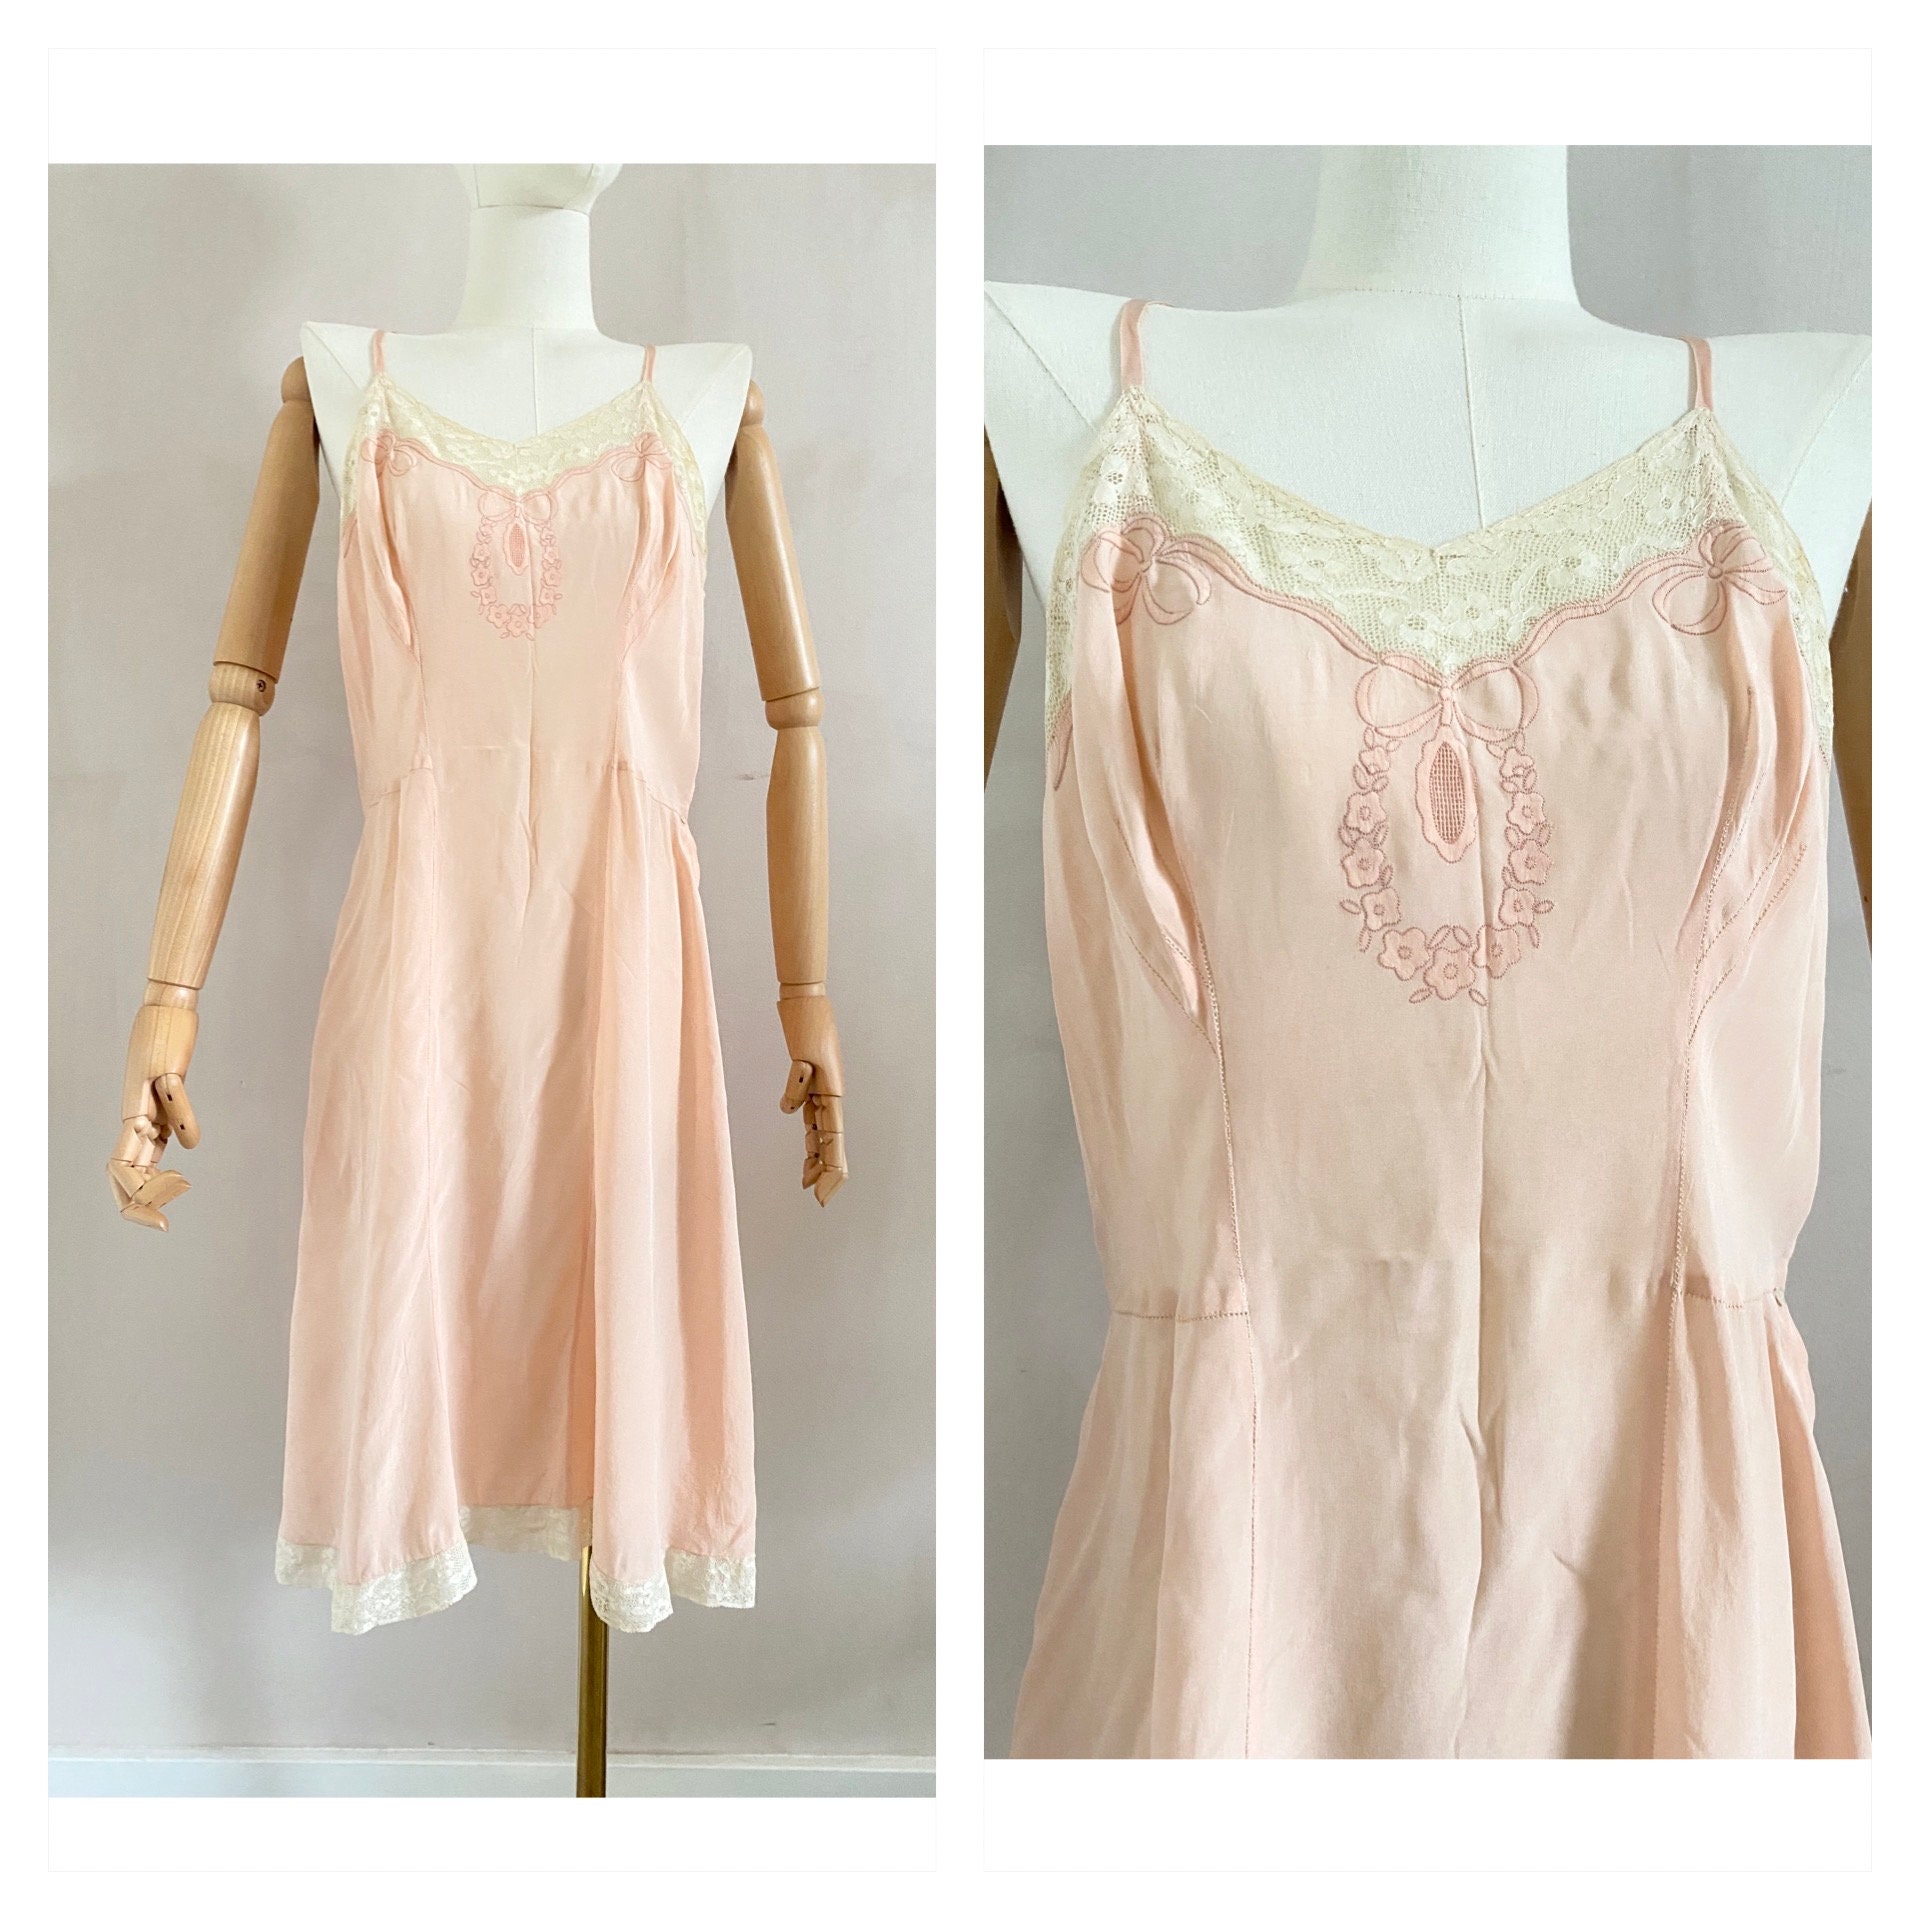 Vintage 40s Silk Pink Slipdress 1940s Lace Pastel Nightgown - Etsy